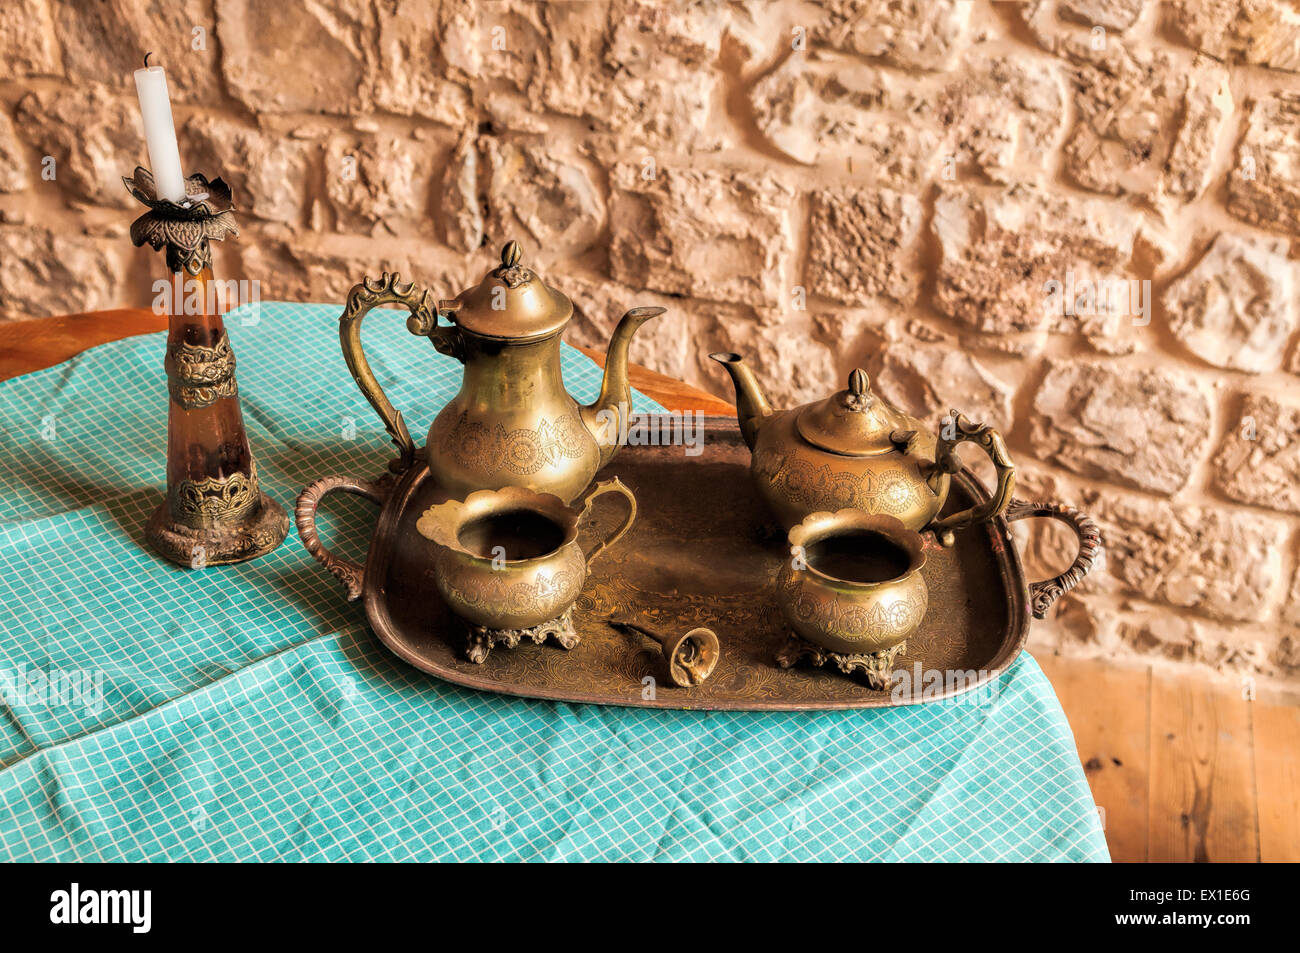 Dinner set of dishes for coffee and tea from the old bronze bell on the tray with the call for workers Stock Photo